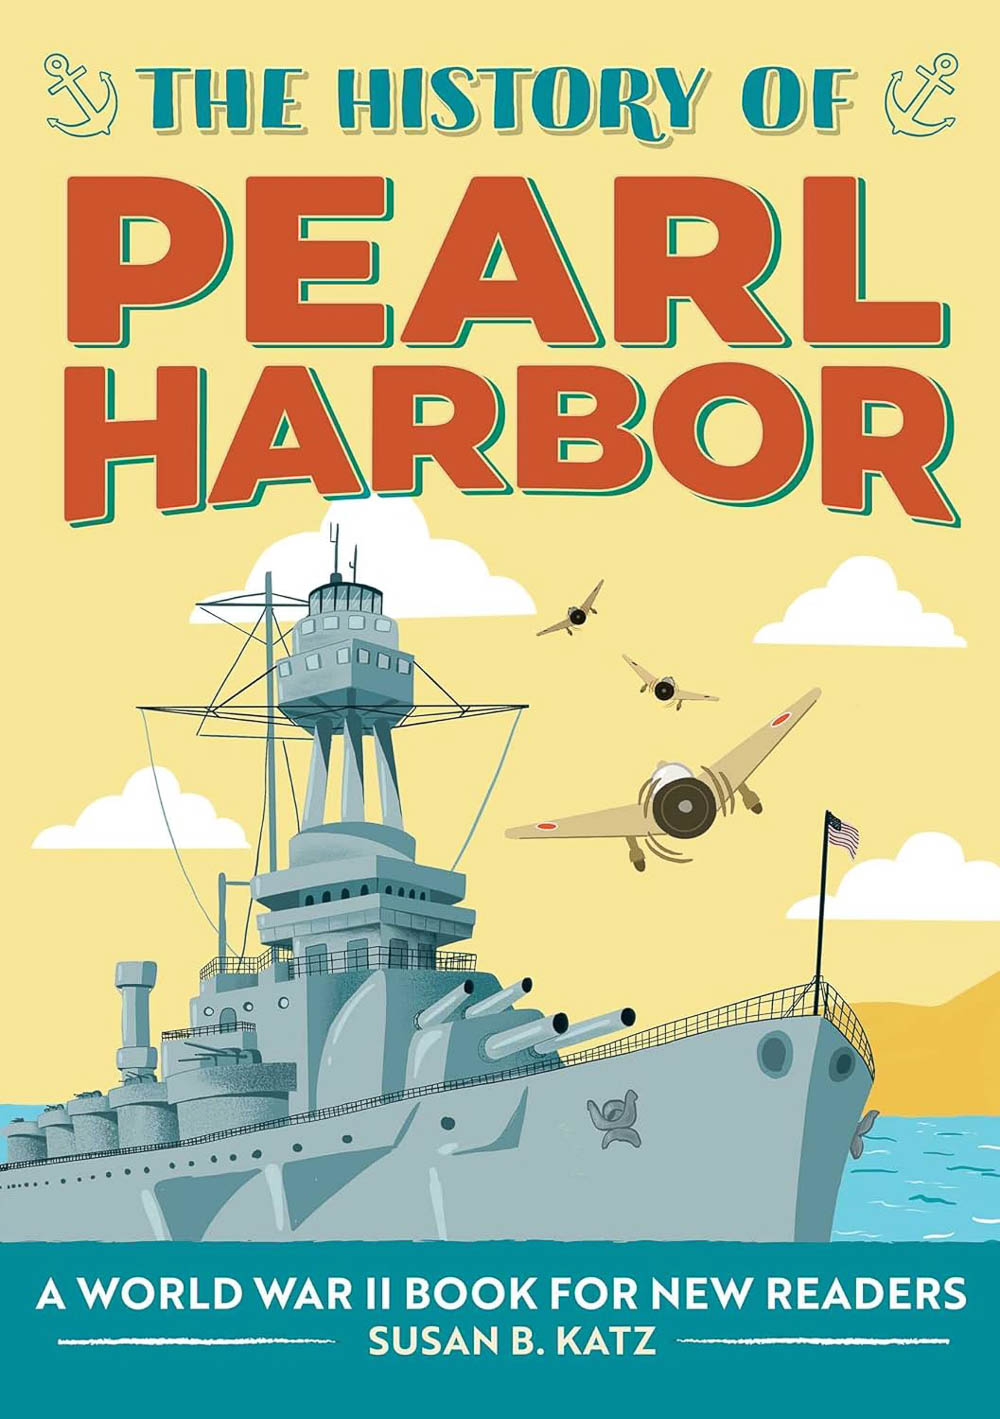 book cover for the history of pearl harbor with an illustration of battleship